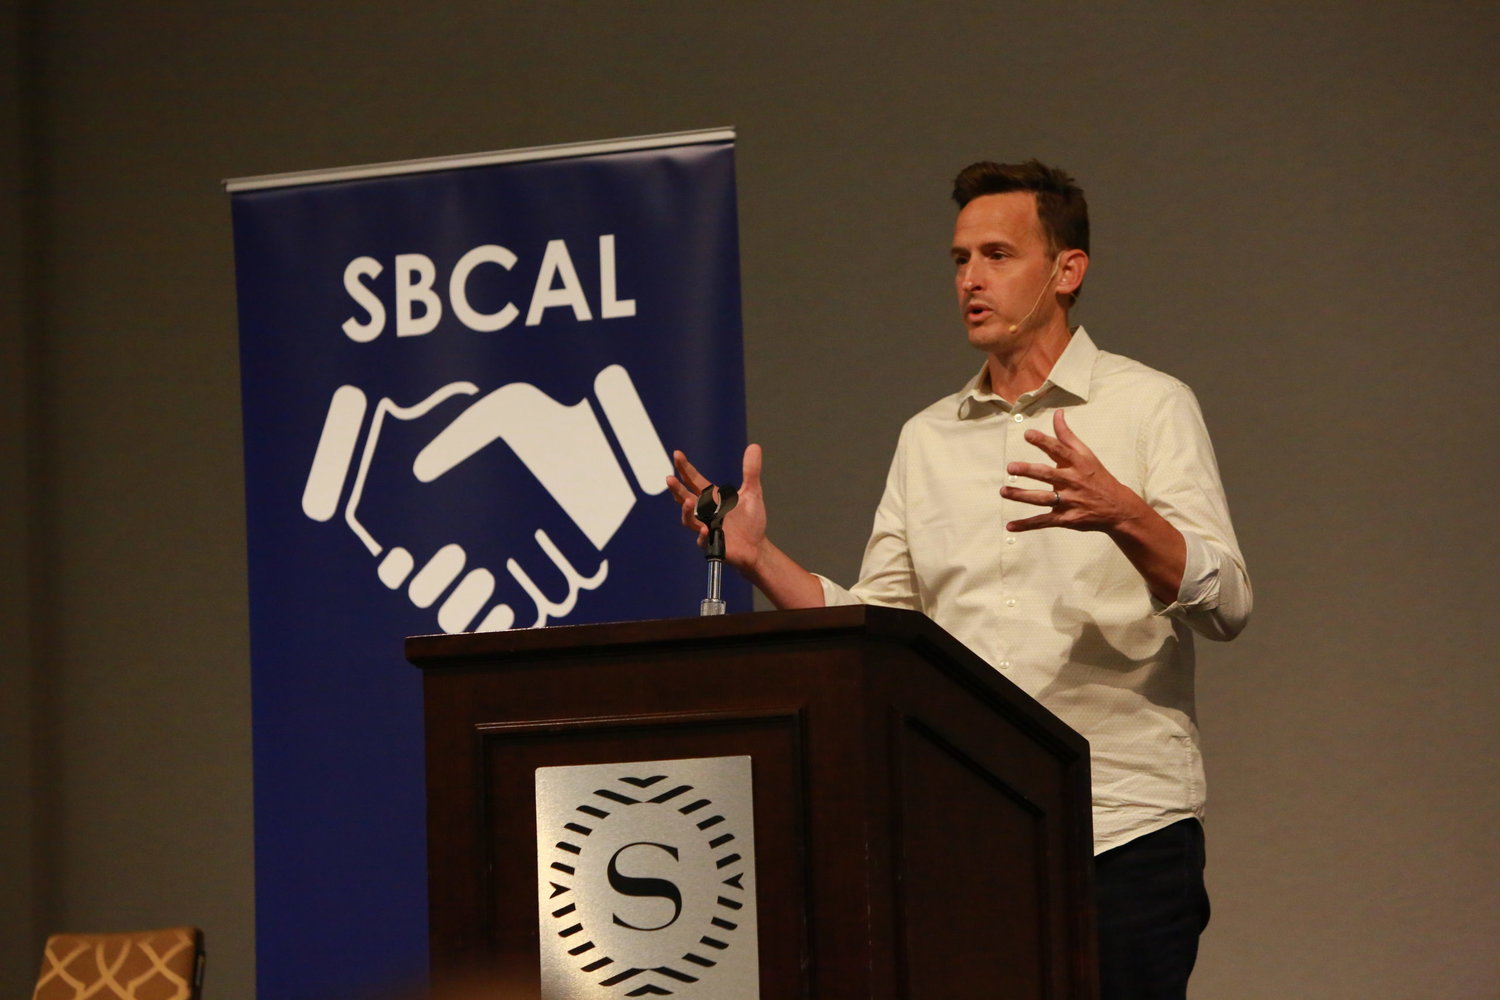 Lifeway president and CEO Ben Mandrell speaks during the SBC Associational Leaders Conference in Anaheim June 12.
This photo is being used for non-commercial purpose and not in connection with selling a good or service.